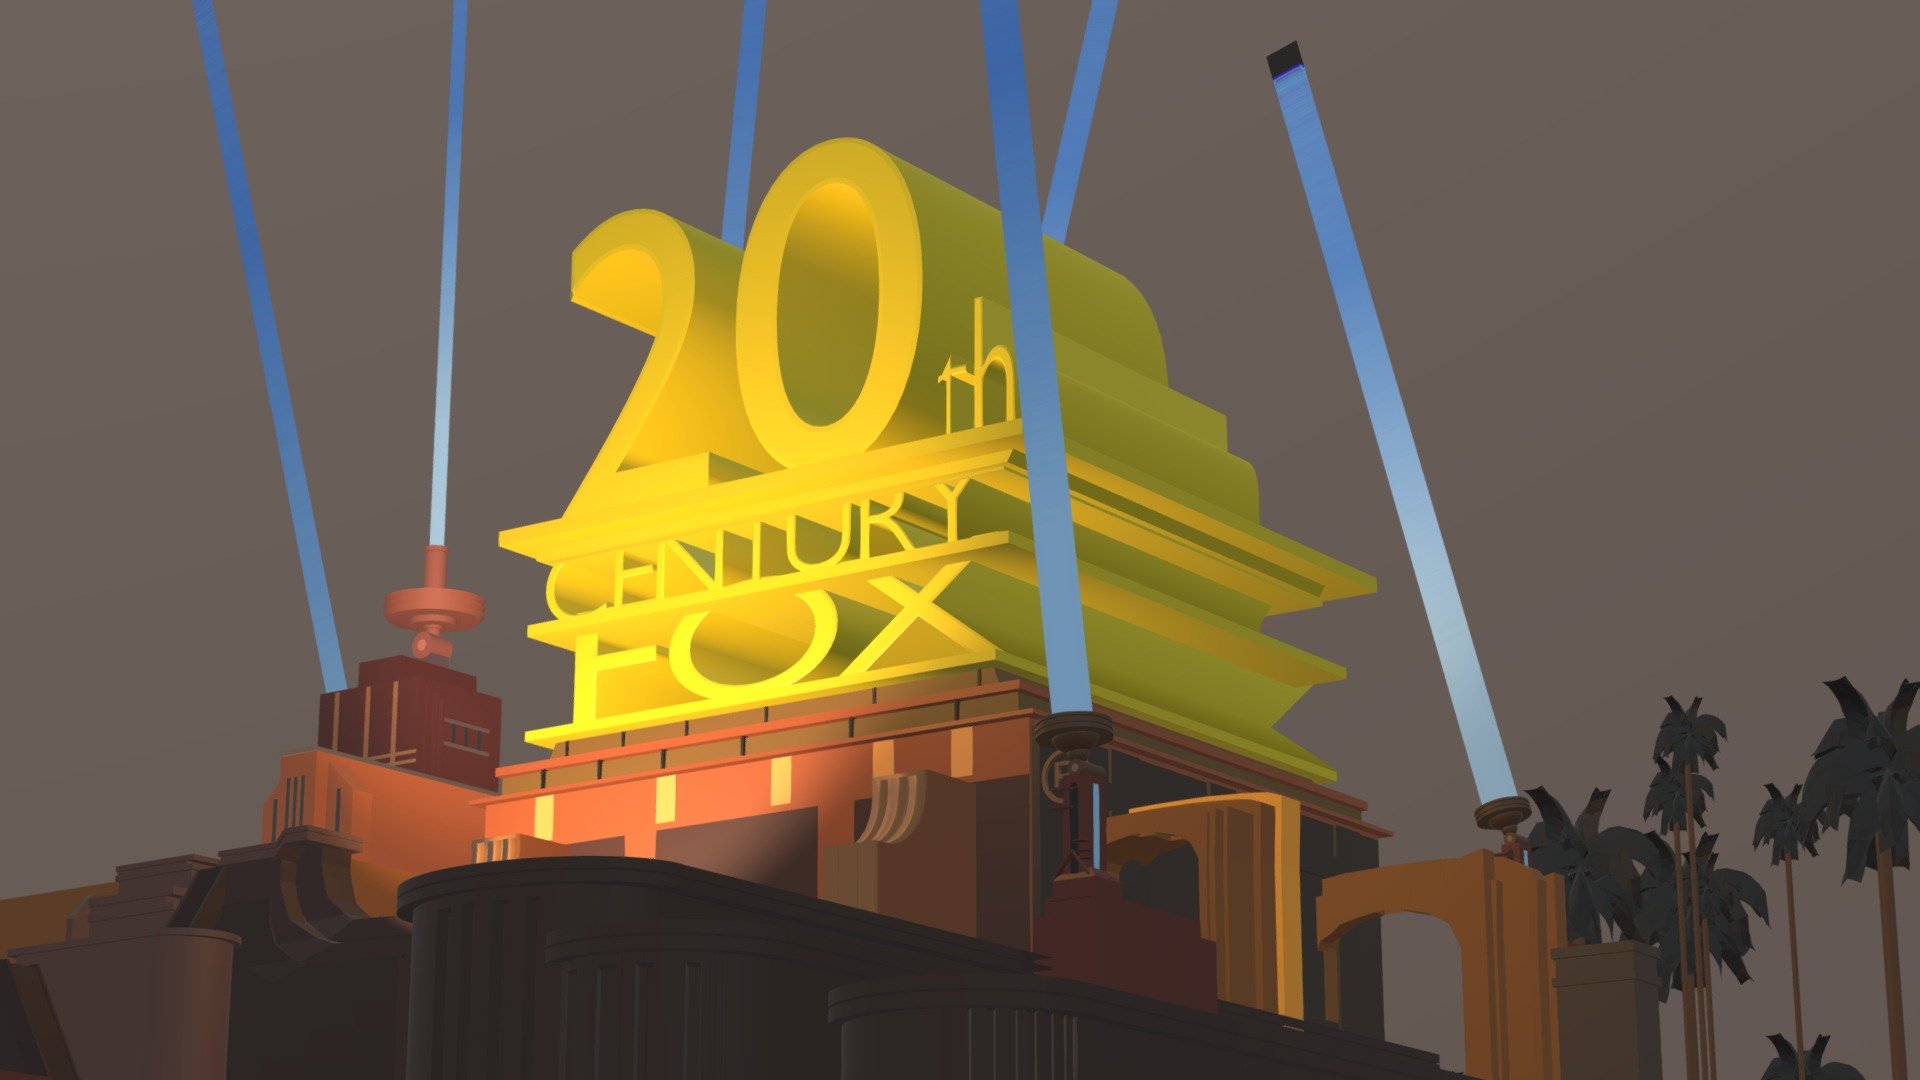 20th century fox logo after effects template free download